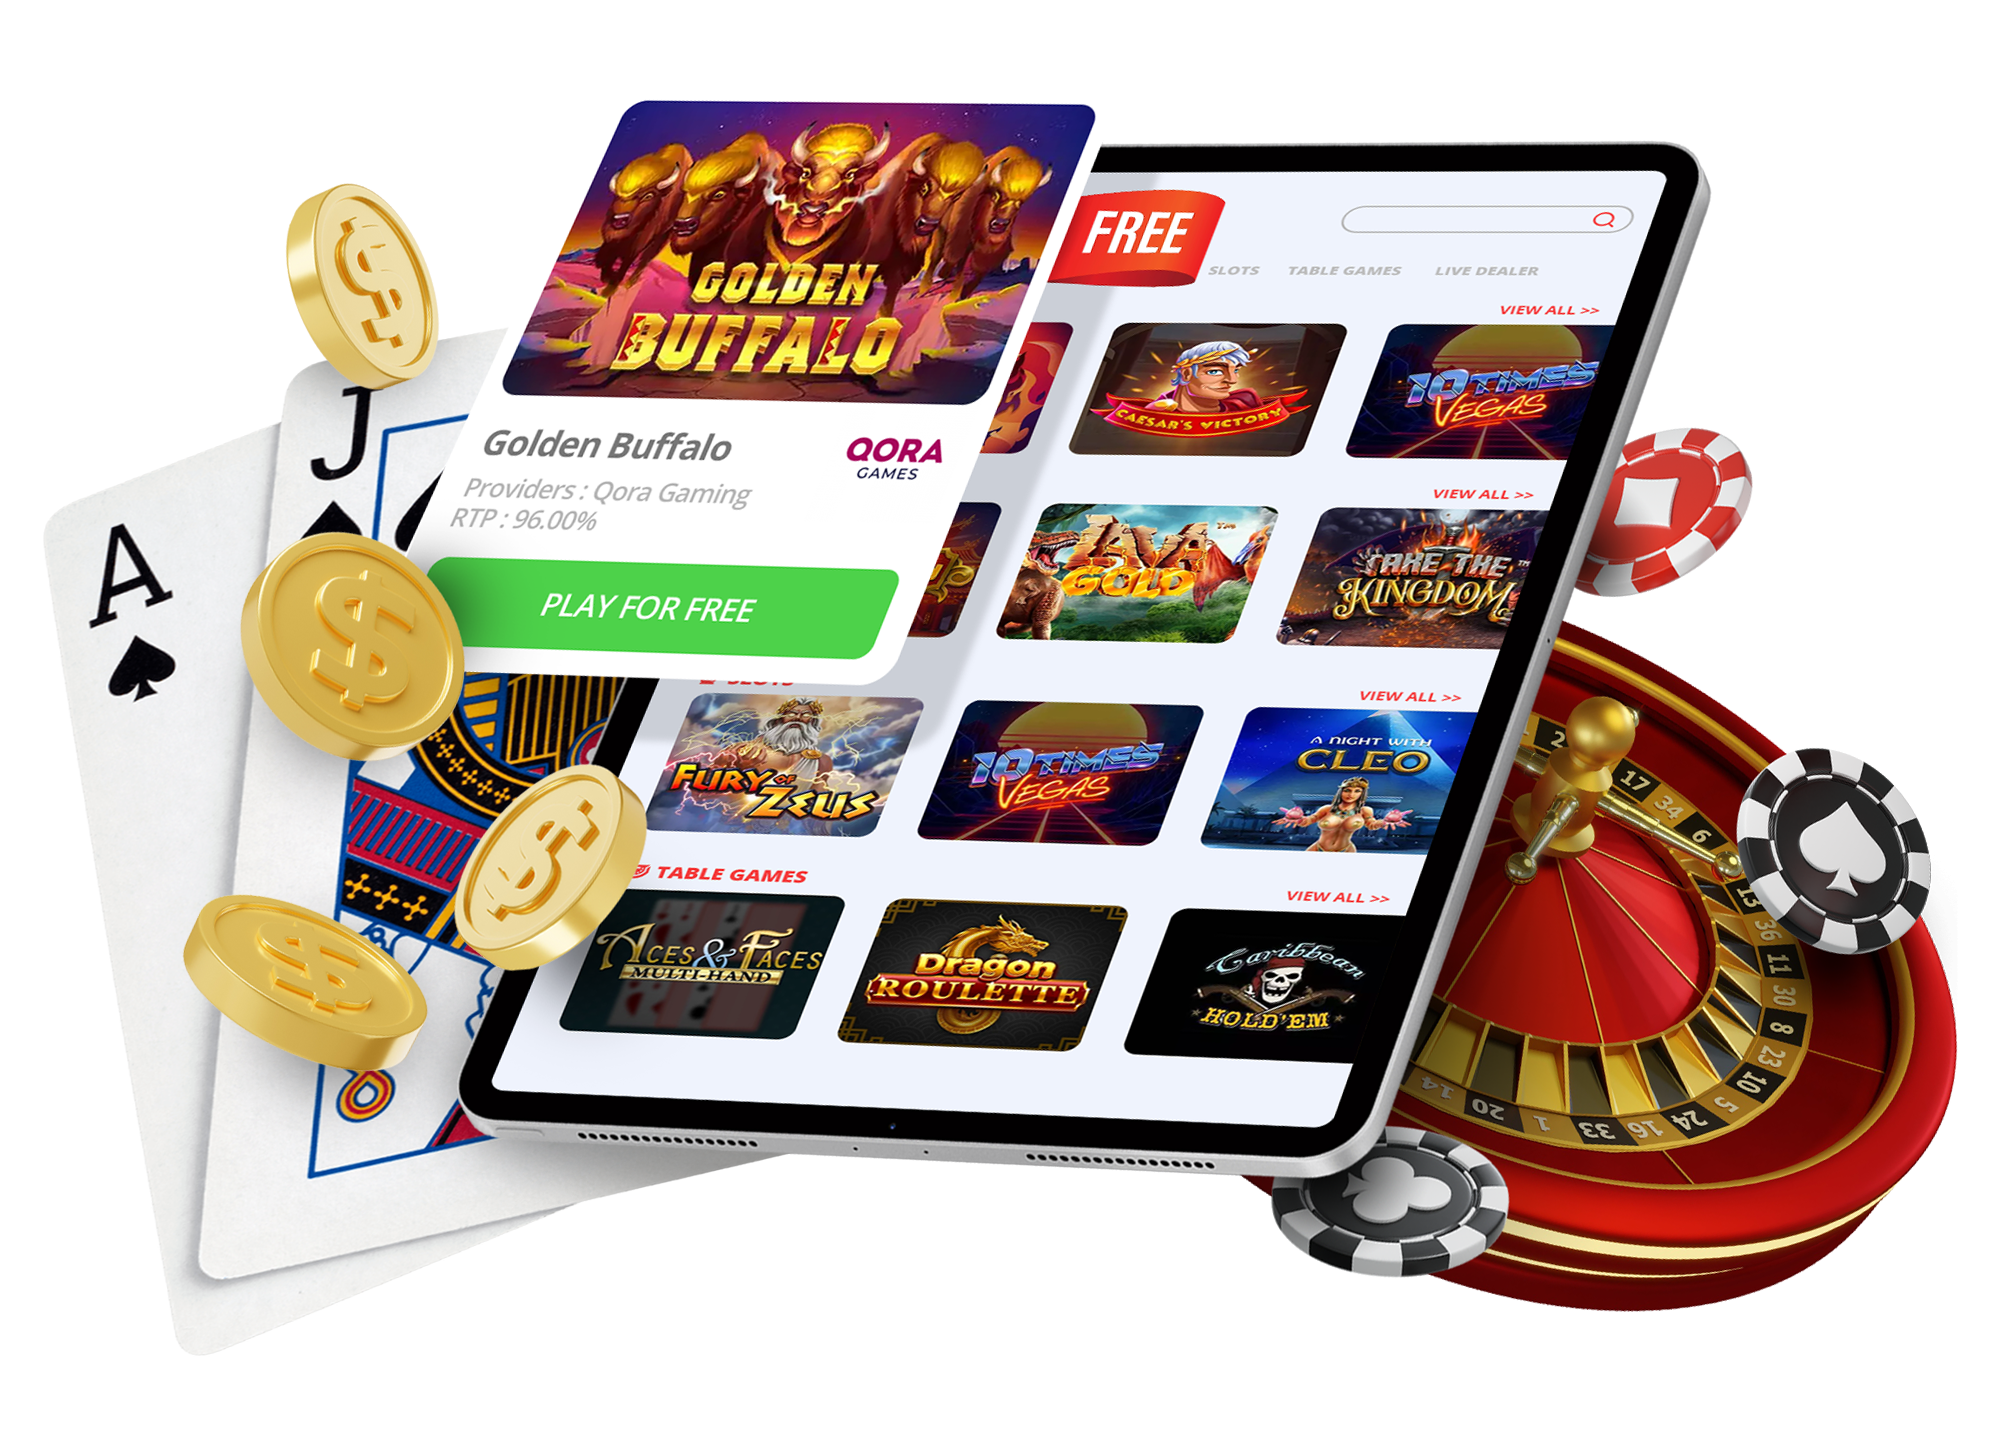 Maximizing Bonuses at Online Casinos Consulting – What The Heck Is That?